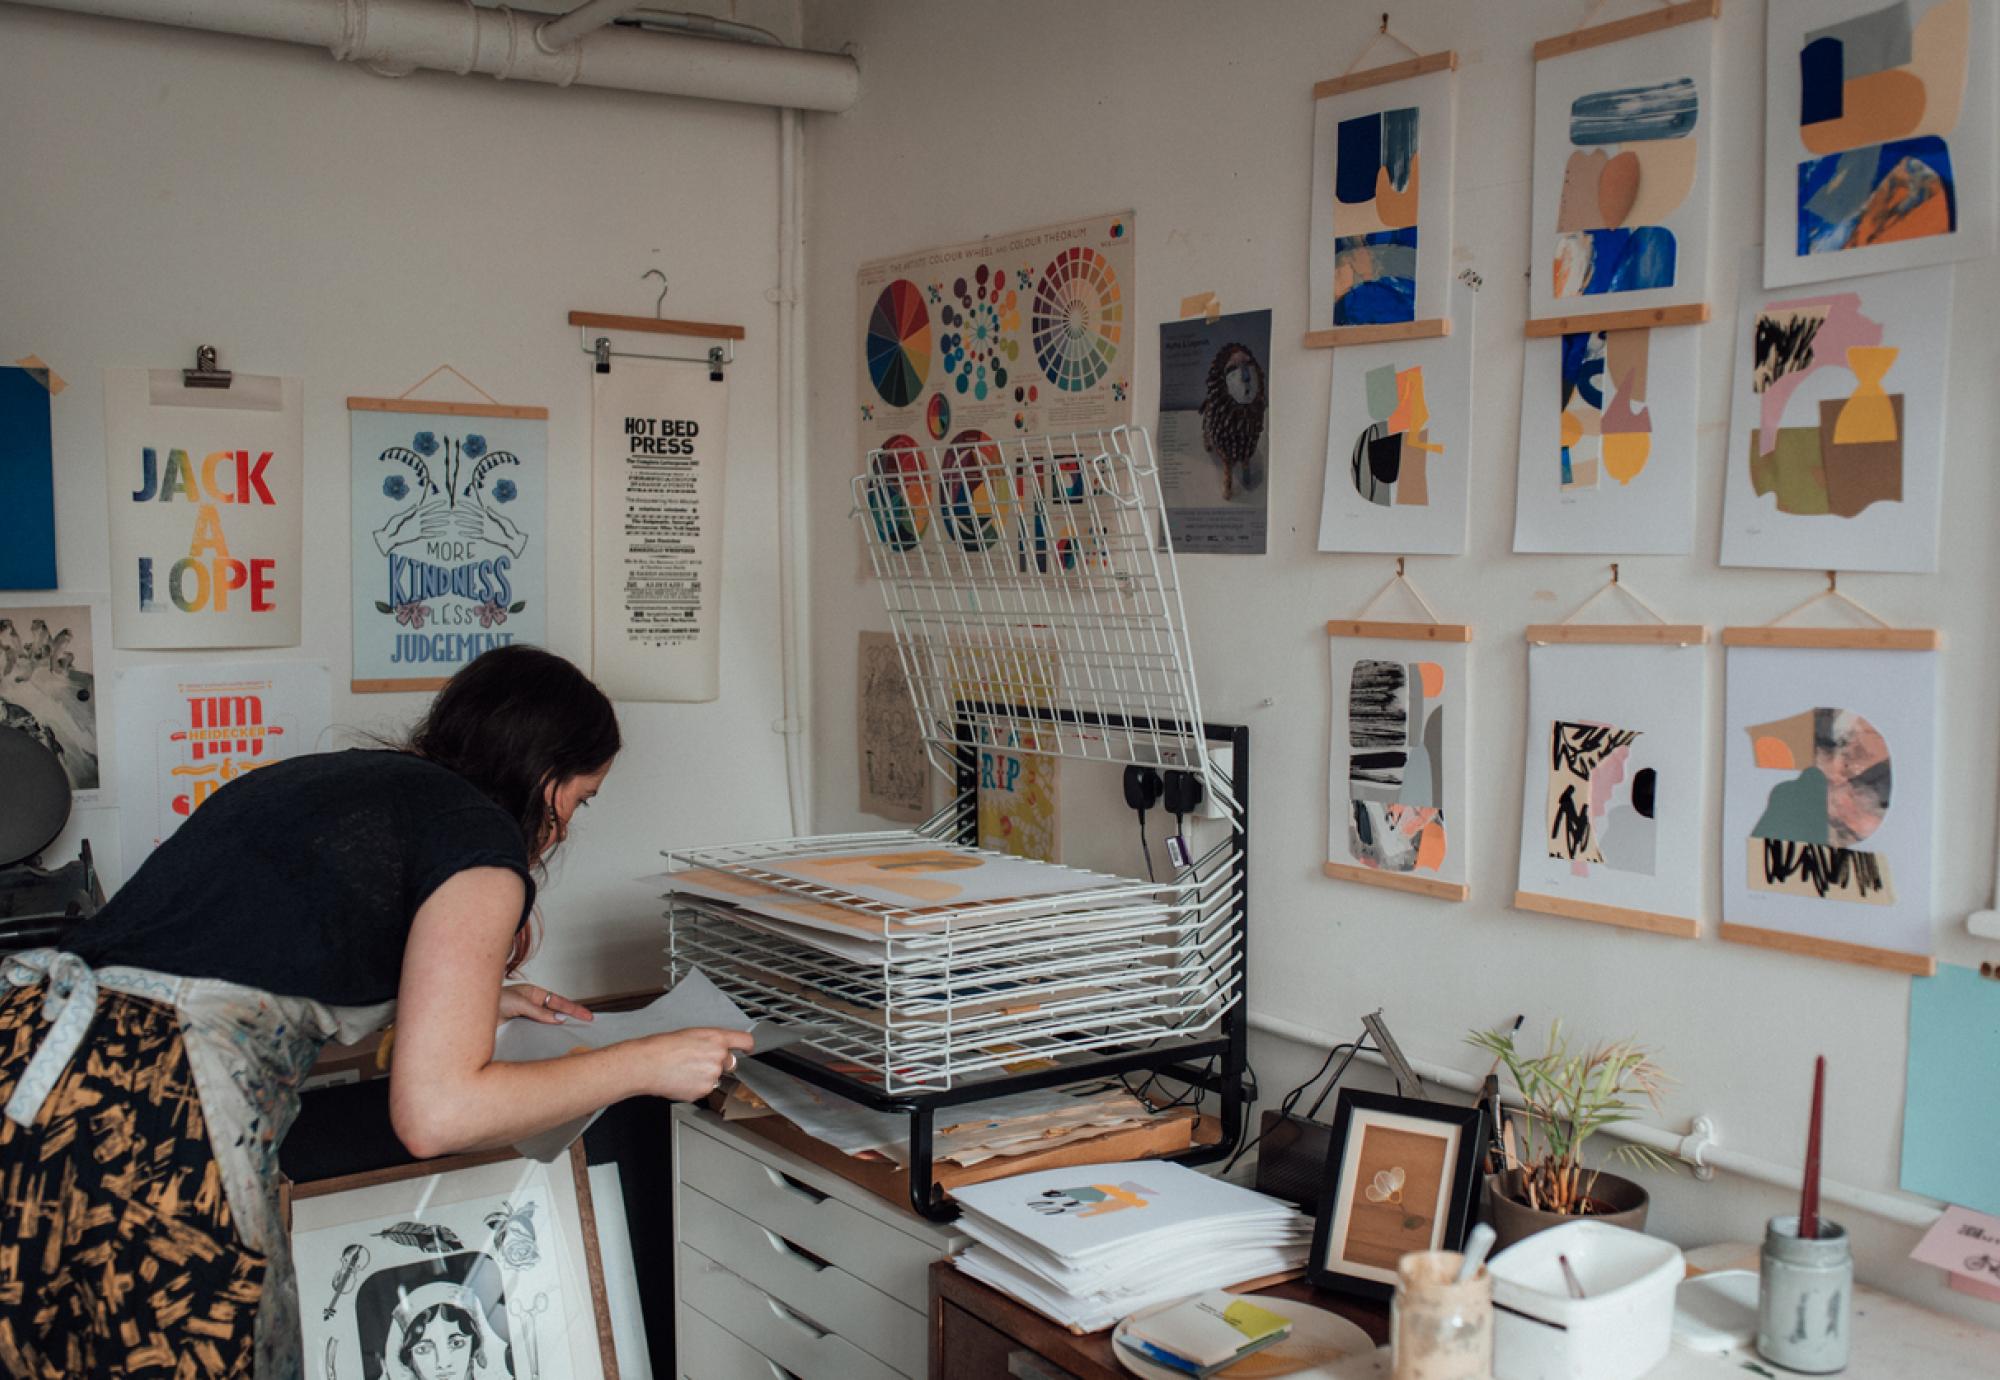 An artist laying prints to dry on a rack